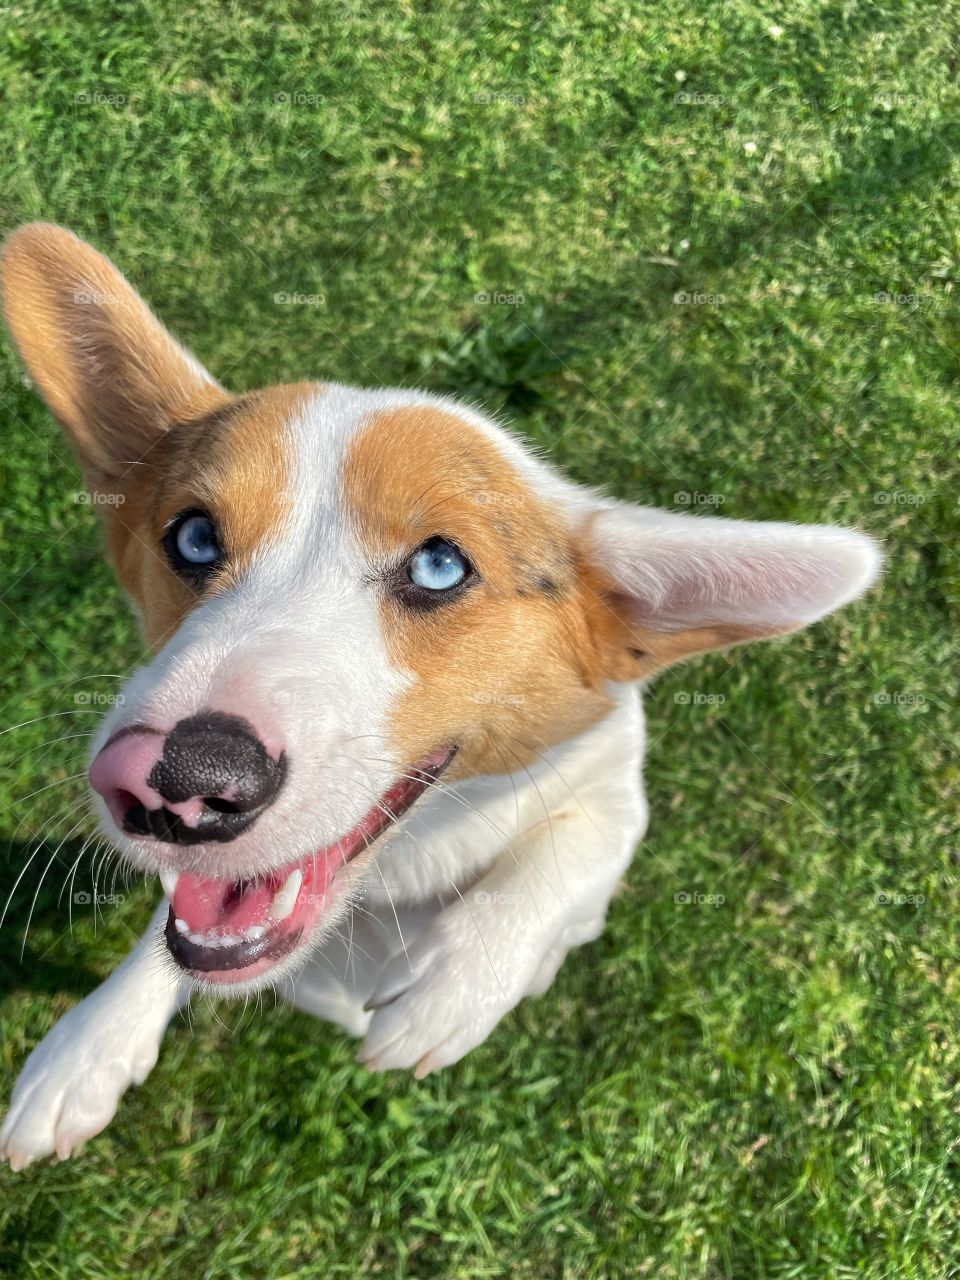 Corgi merle blue eyes puppie canine puppy pup cute adorable jump jumping happy k9 grass outdoors playing tricks cattle ranch dog